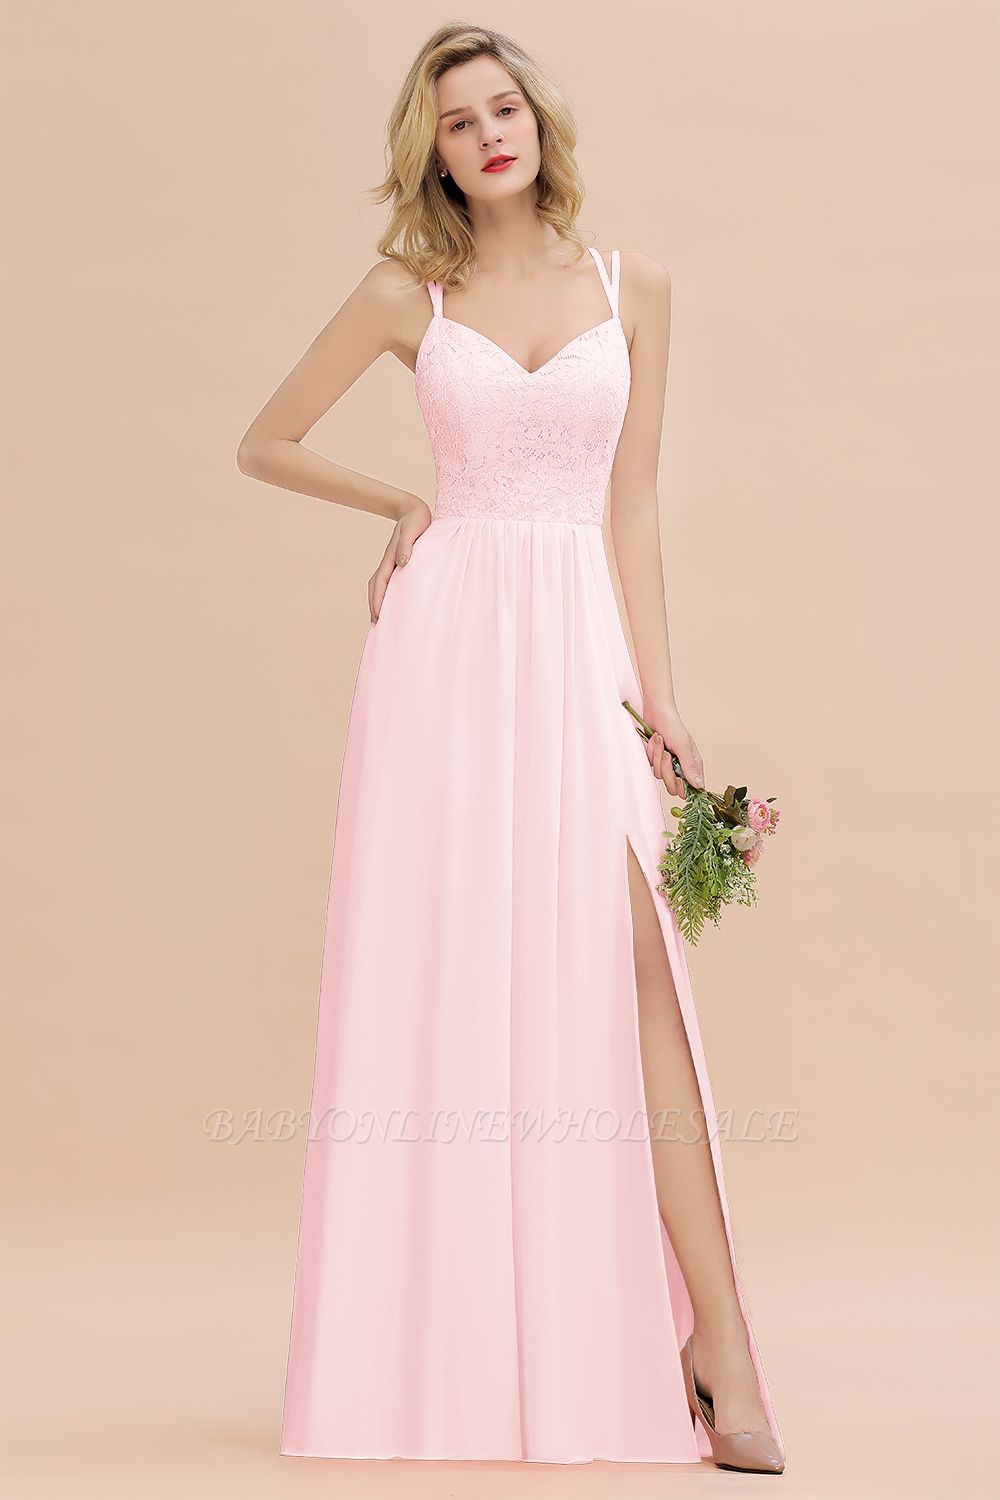 Sweetheart Aline Lace Party Dress Sleeveless Bridesmaid Dress with Side Slit